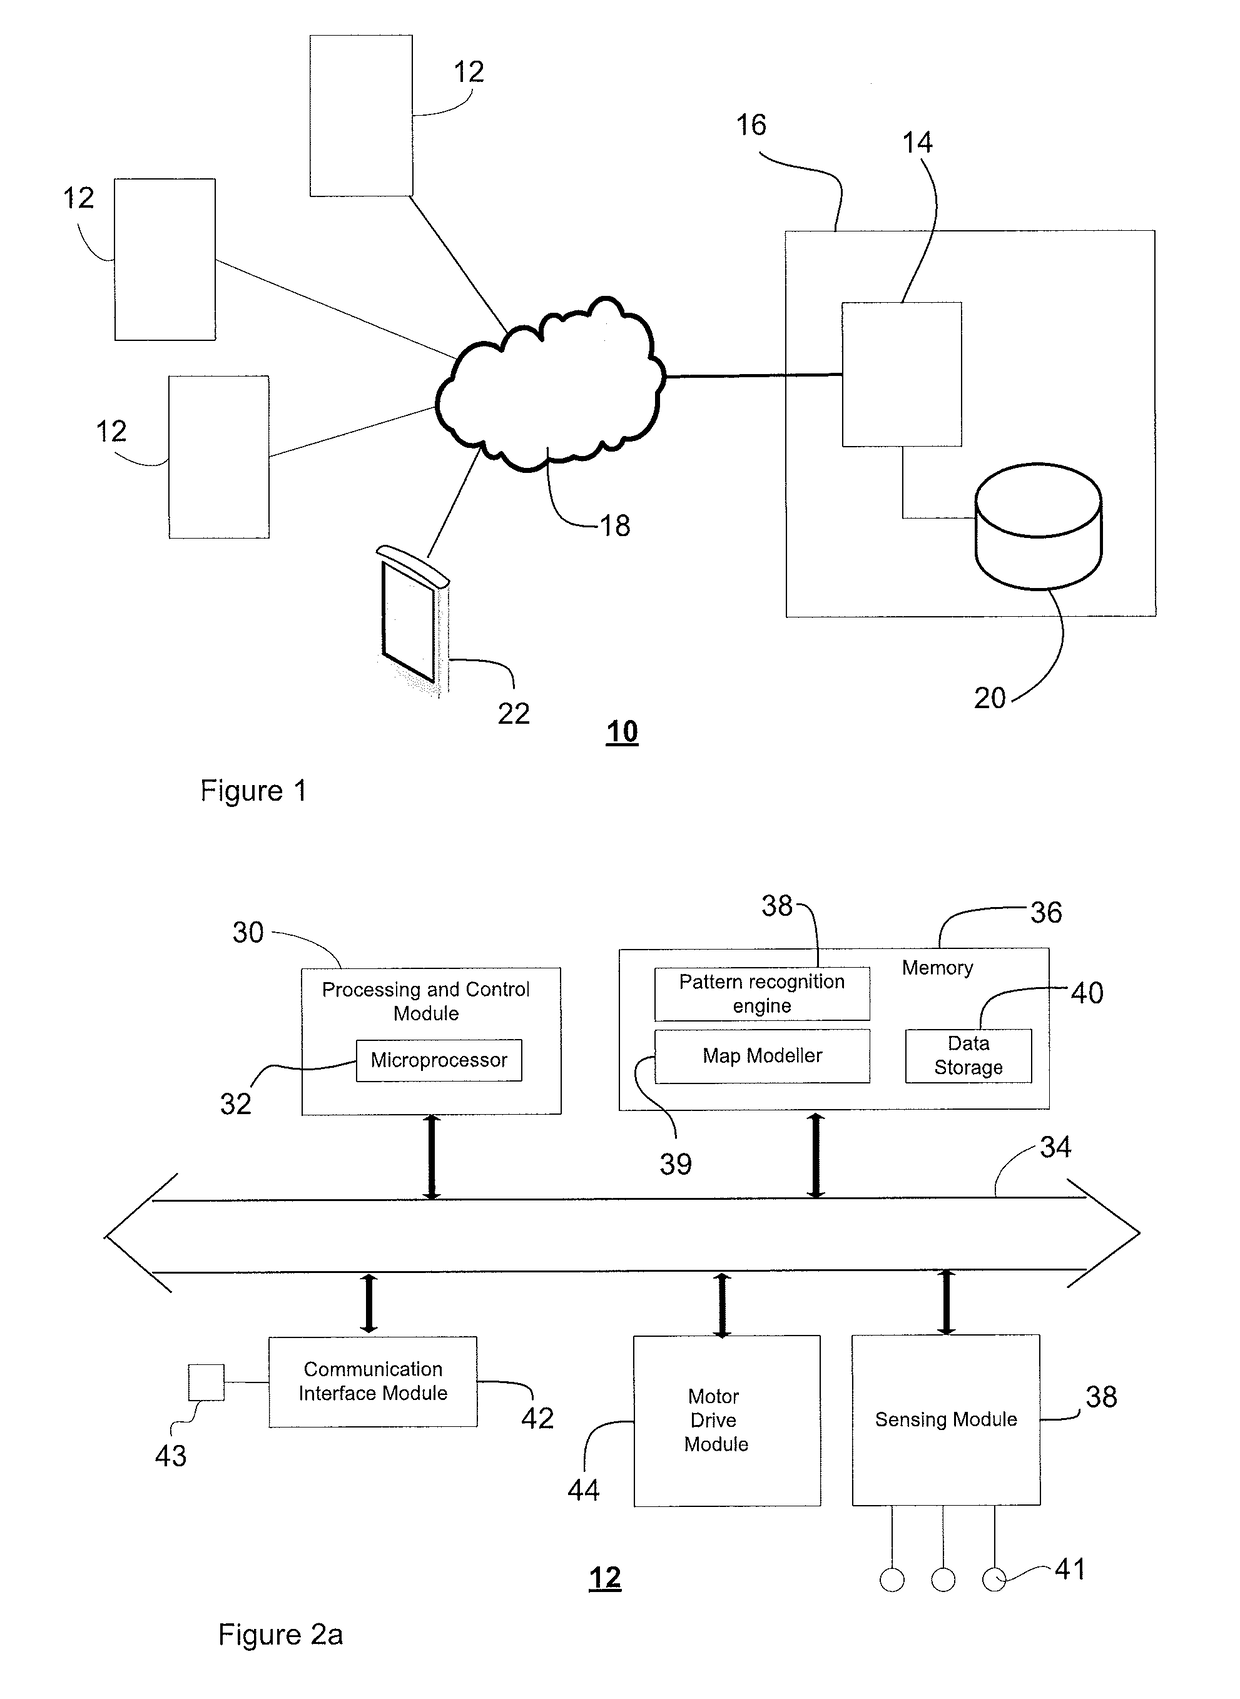 Method for sensing interior spaces to auto-generate a navigational map